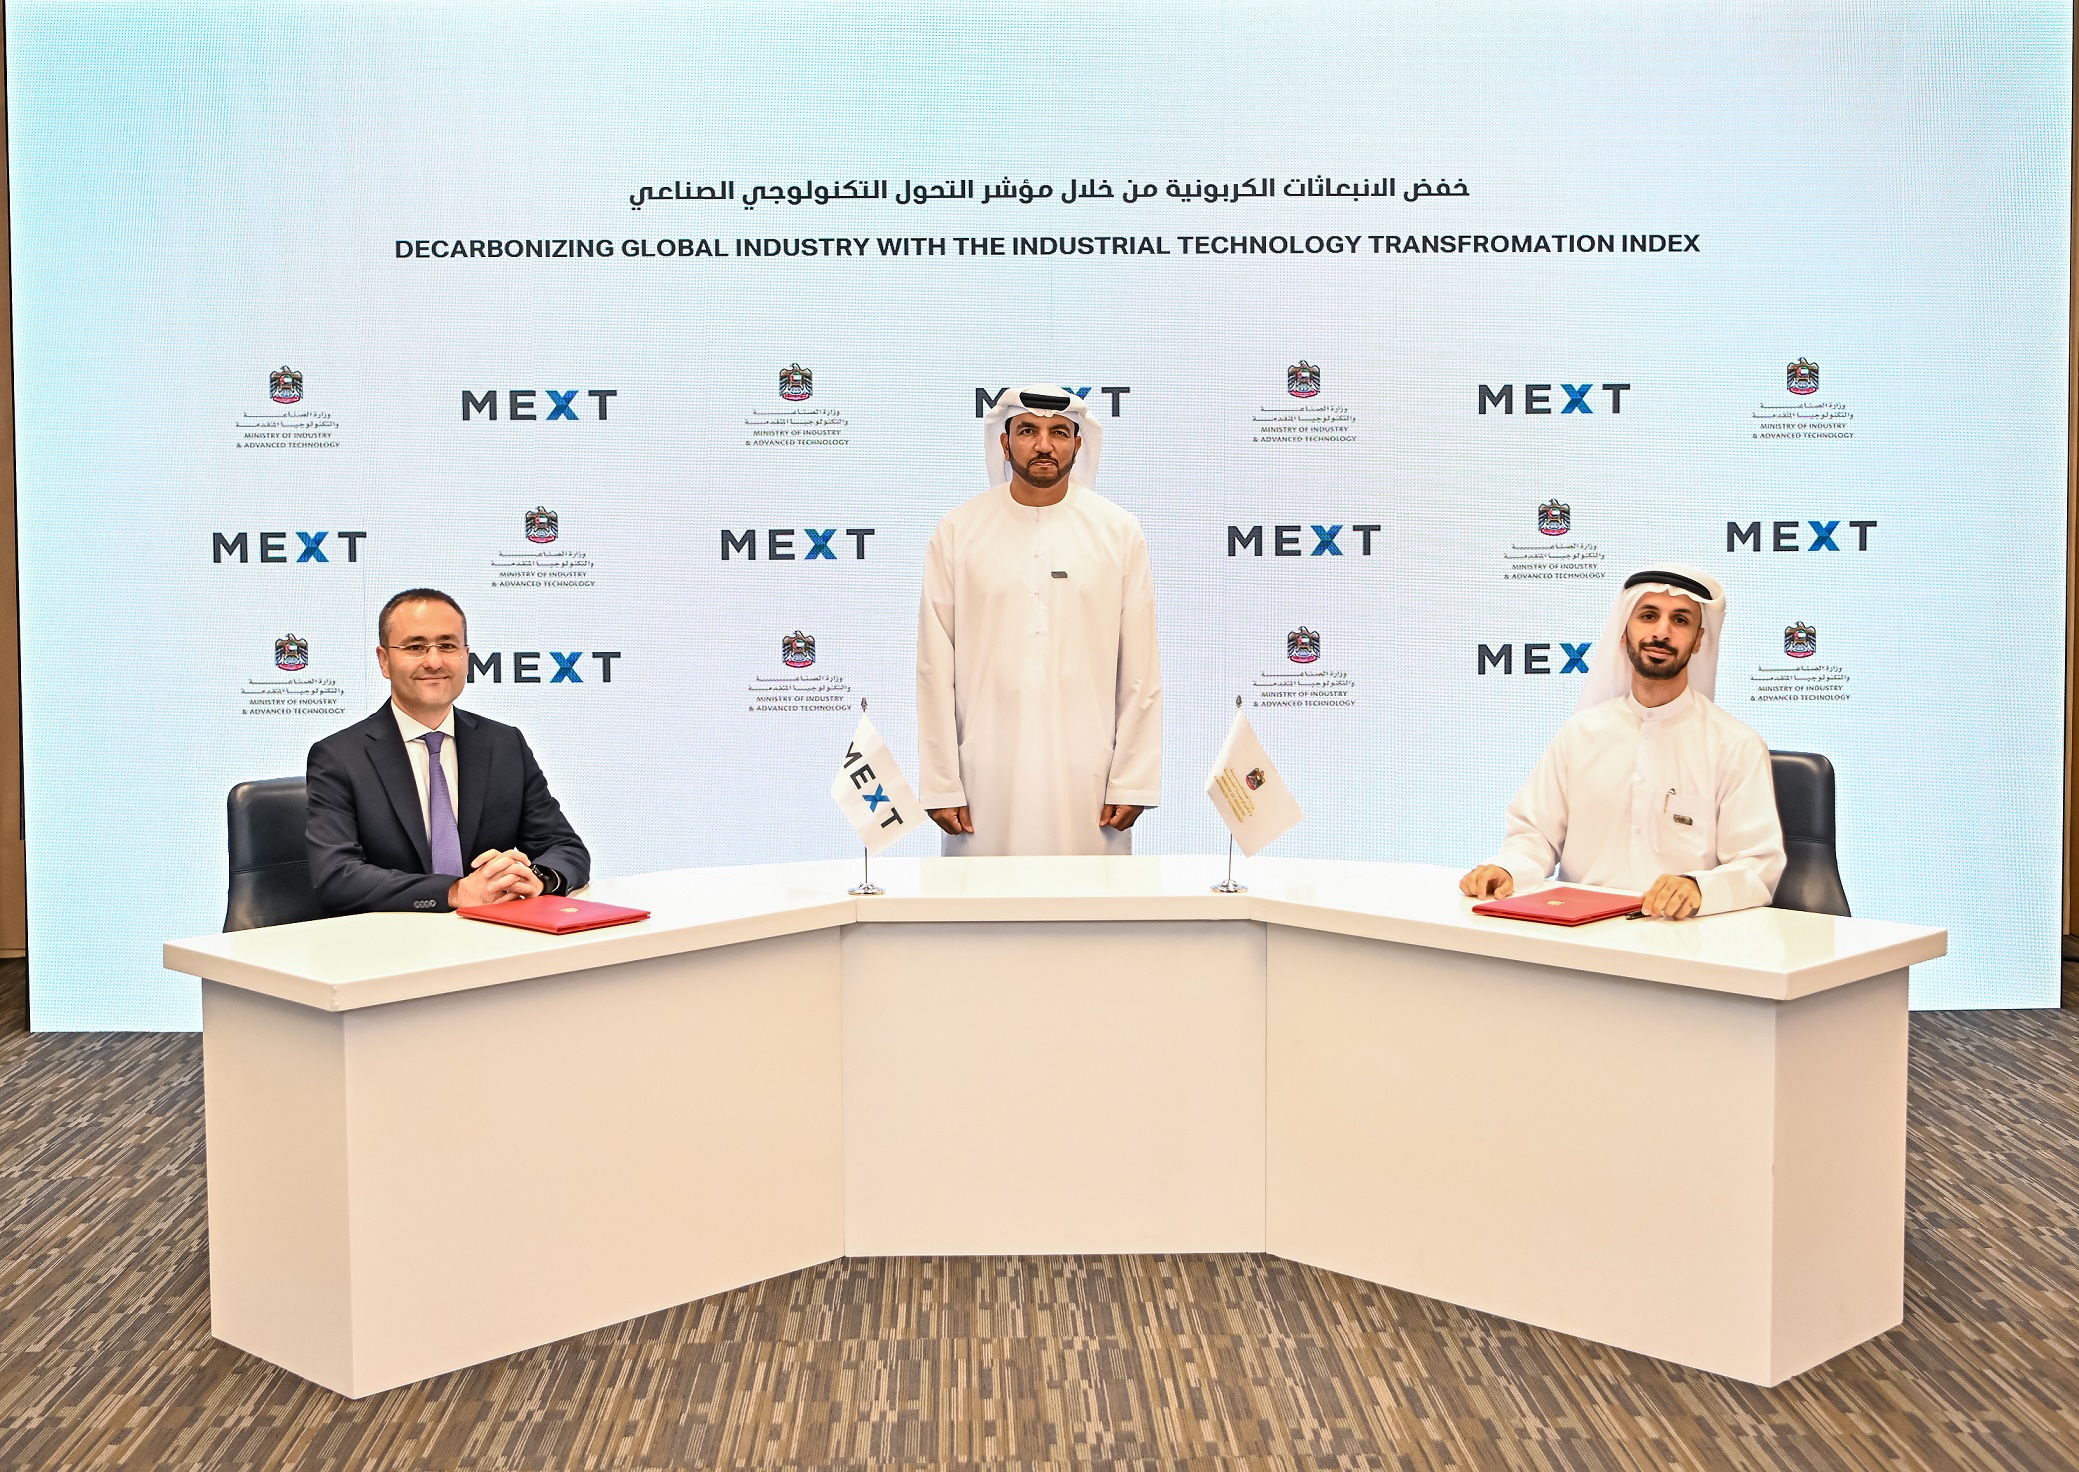  UAE to deploy ITTI globally in bid to accelerate decarbonization in manufacturing sector